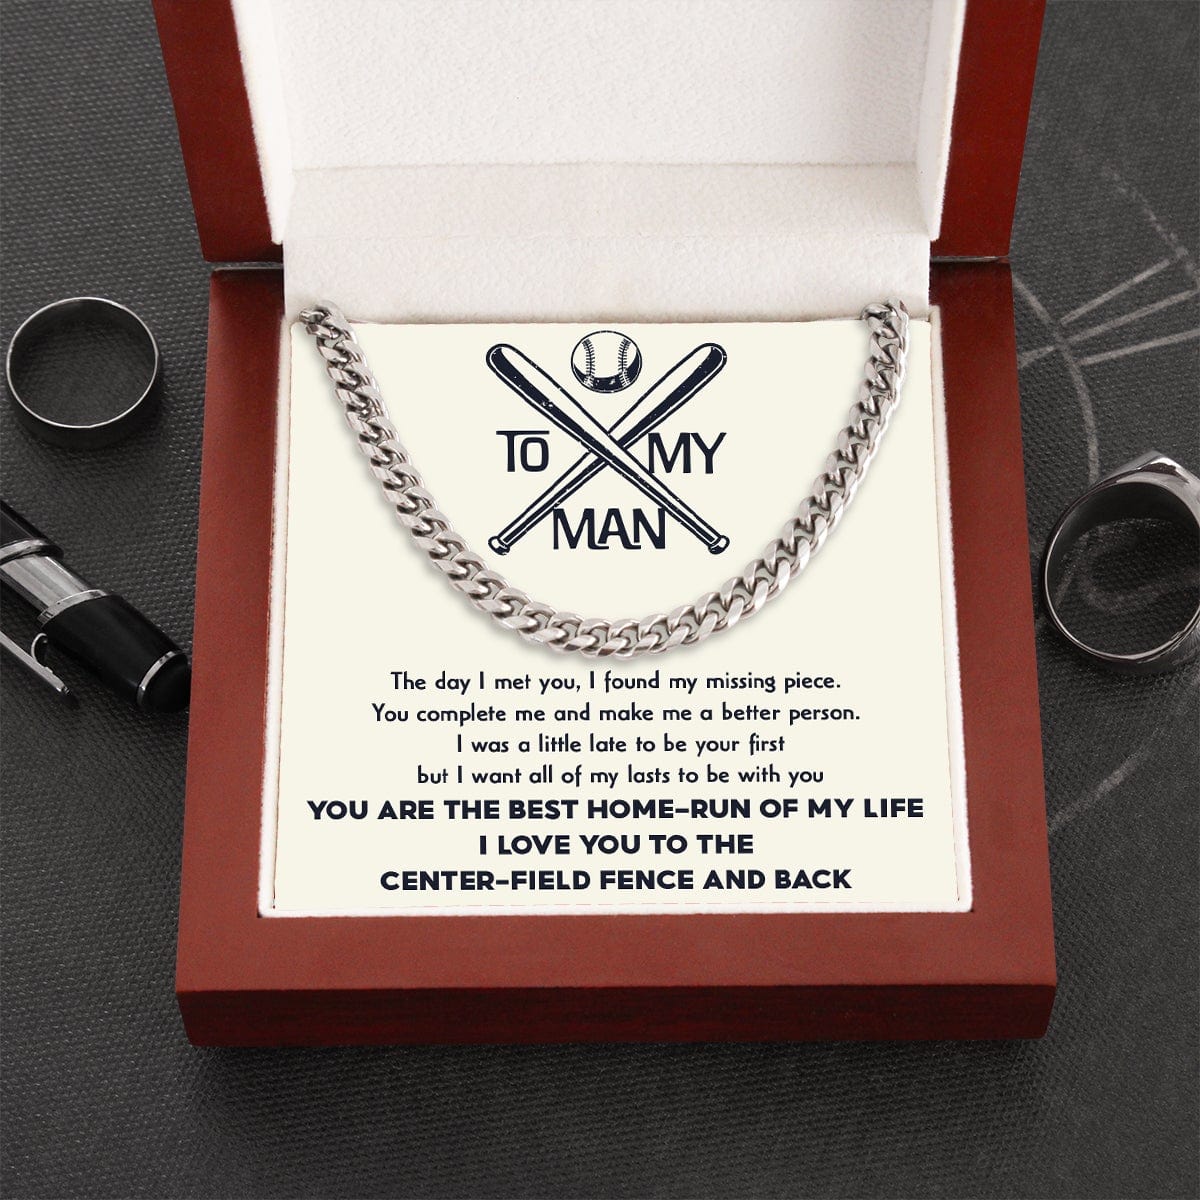 Cuban Link Chain - Baseball - To My Man - You complete me - Ssb26005